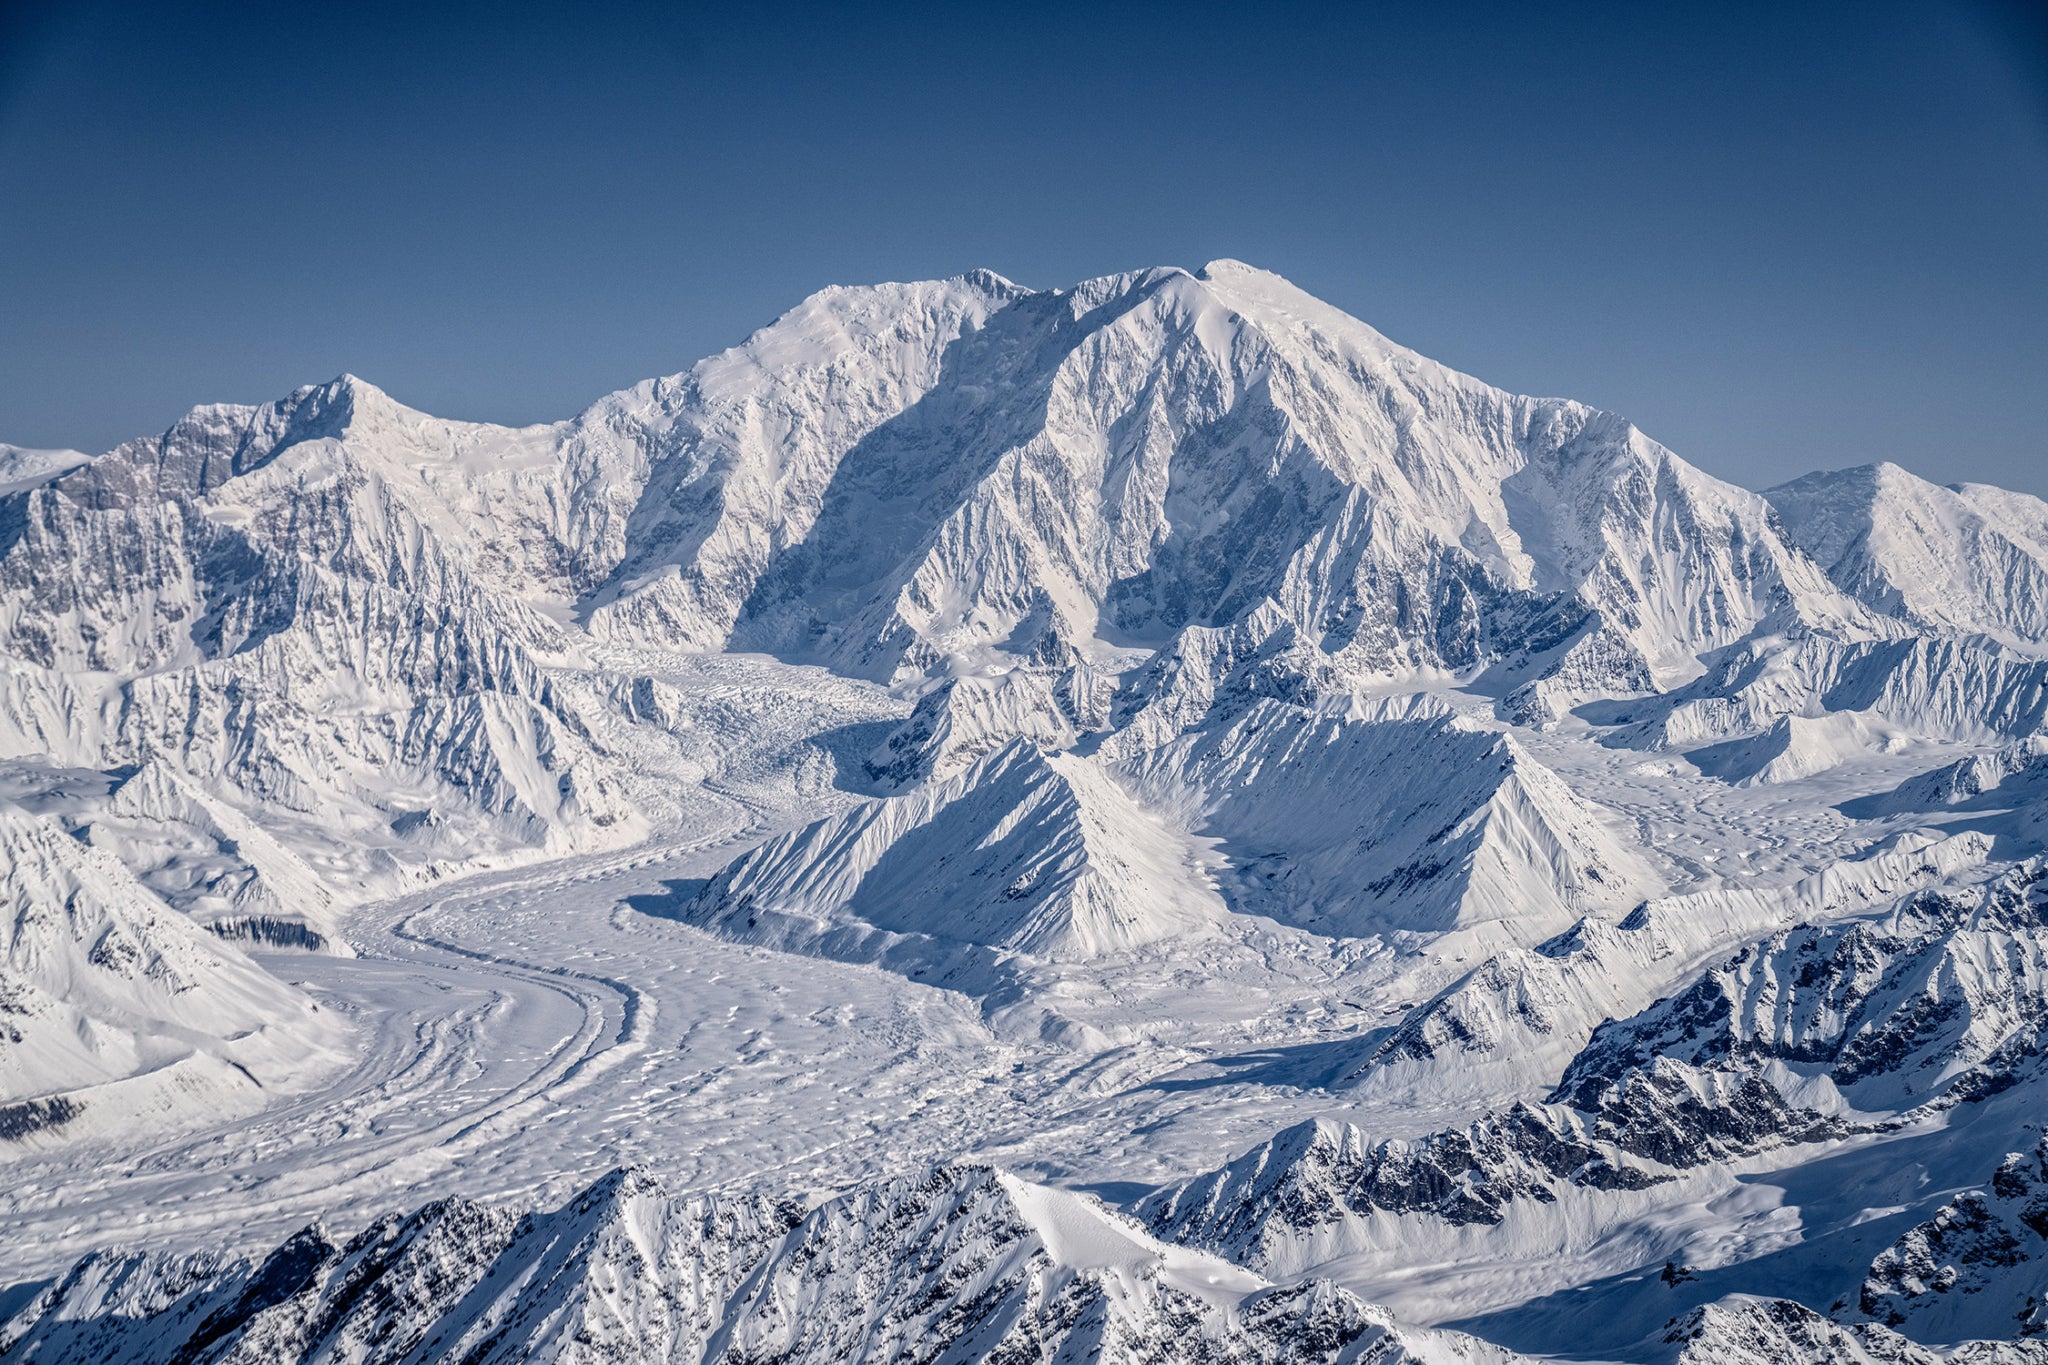 Mount Foraker, or Sultana, the second-highest peak in the Alaska Range, as seen from the plane. Photo: Drew Smith